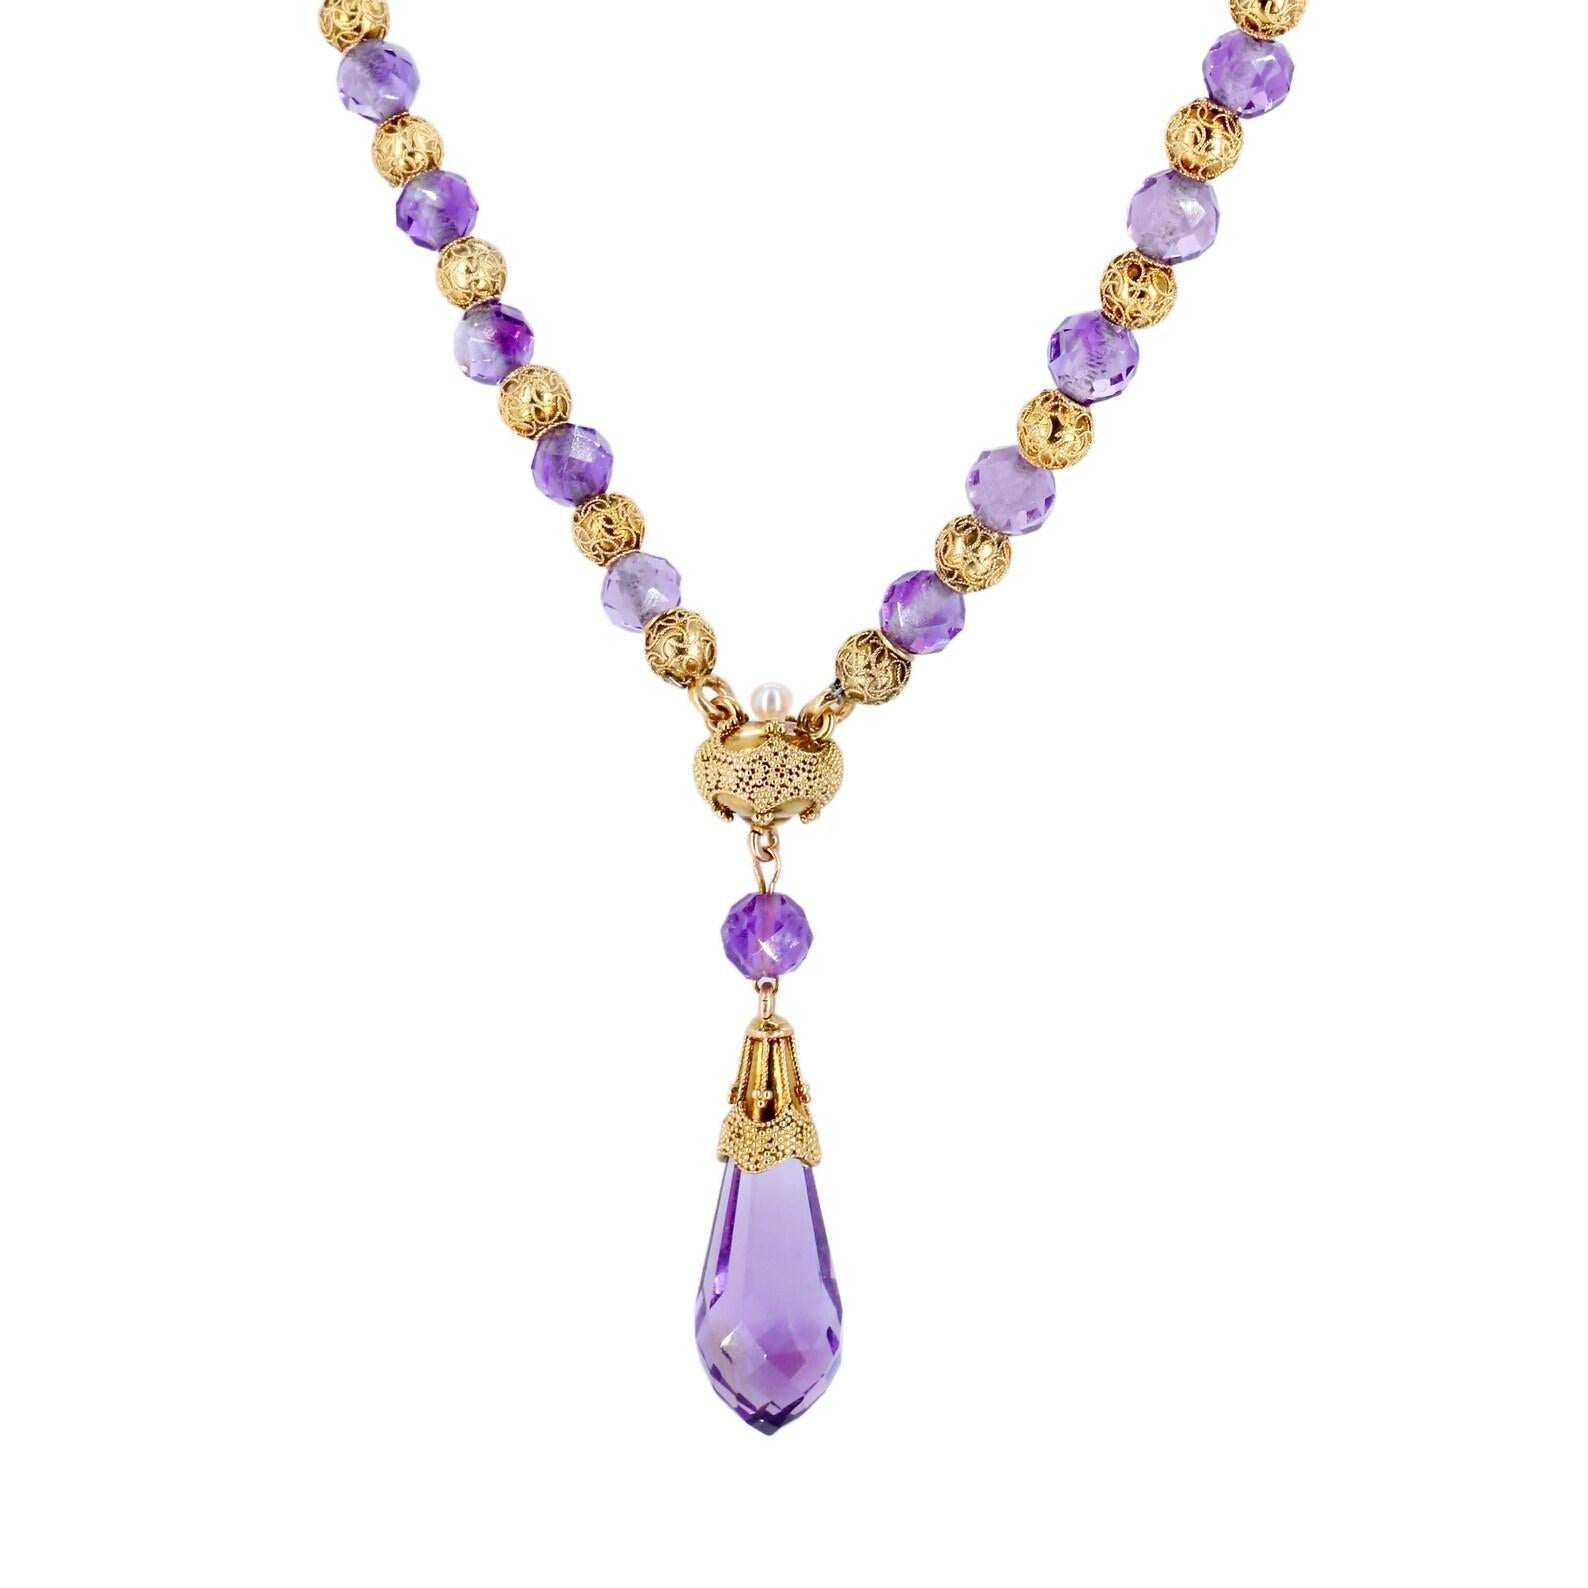 Bead Victorian Faceted Amethyst & Cannetille Gold Filigree Drop Necklace 18 Karat Gol For Sale